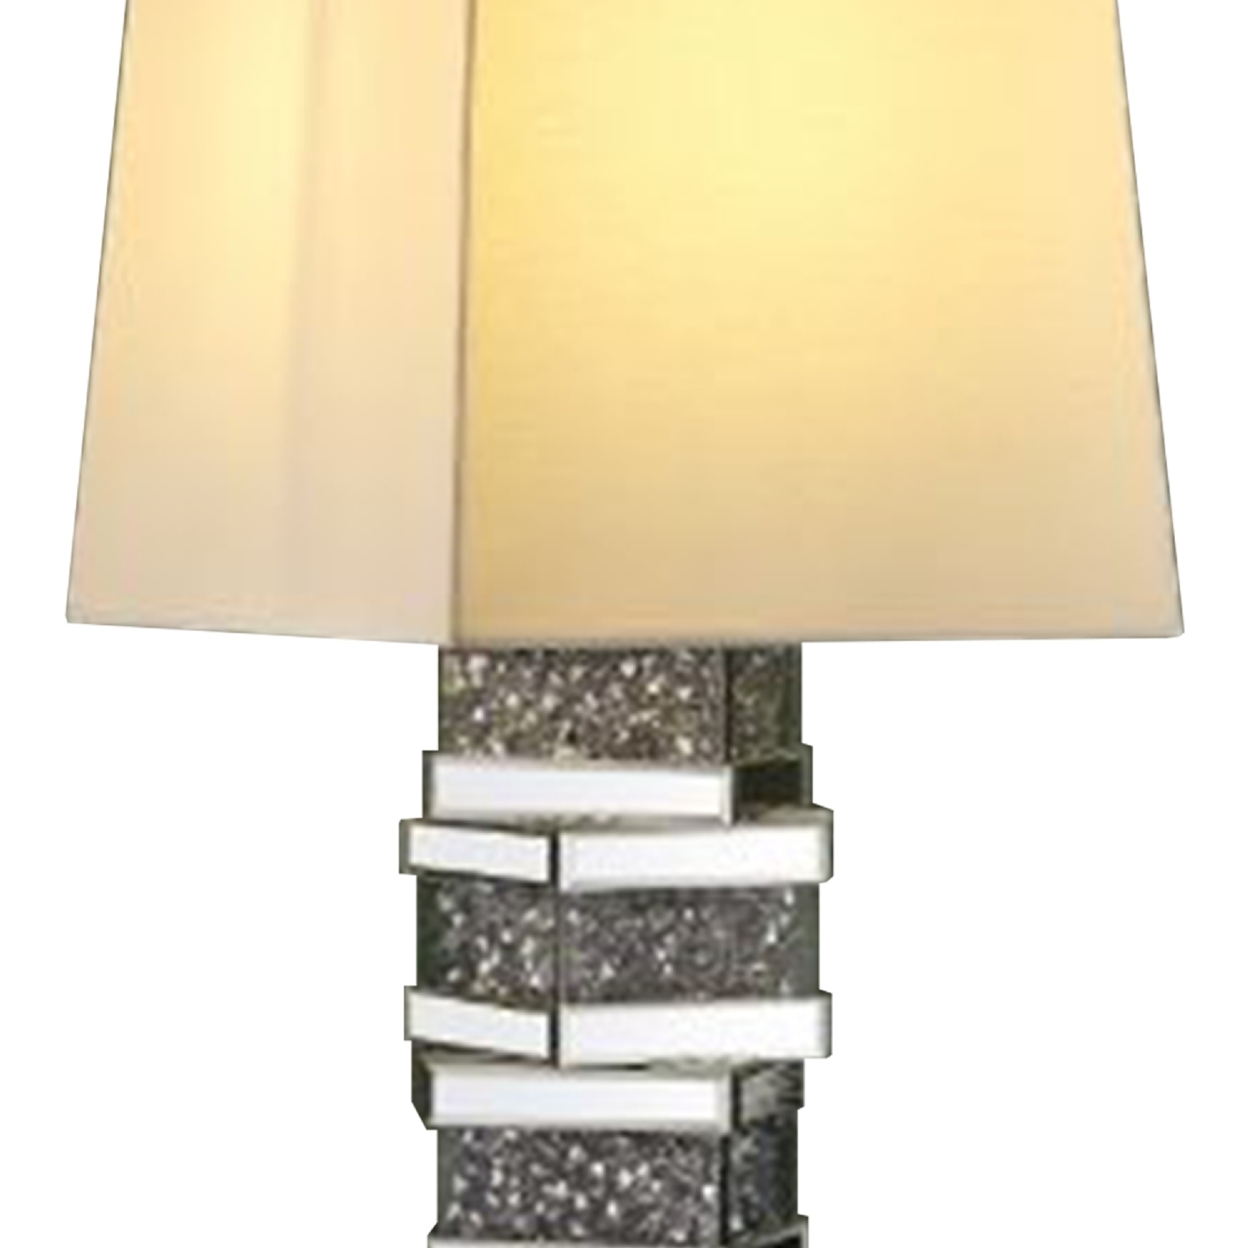 Table Lamp With Stacked Cuboid Shape And Faux Stones Inlay, Silver- Saltoro Sherpi